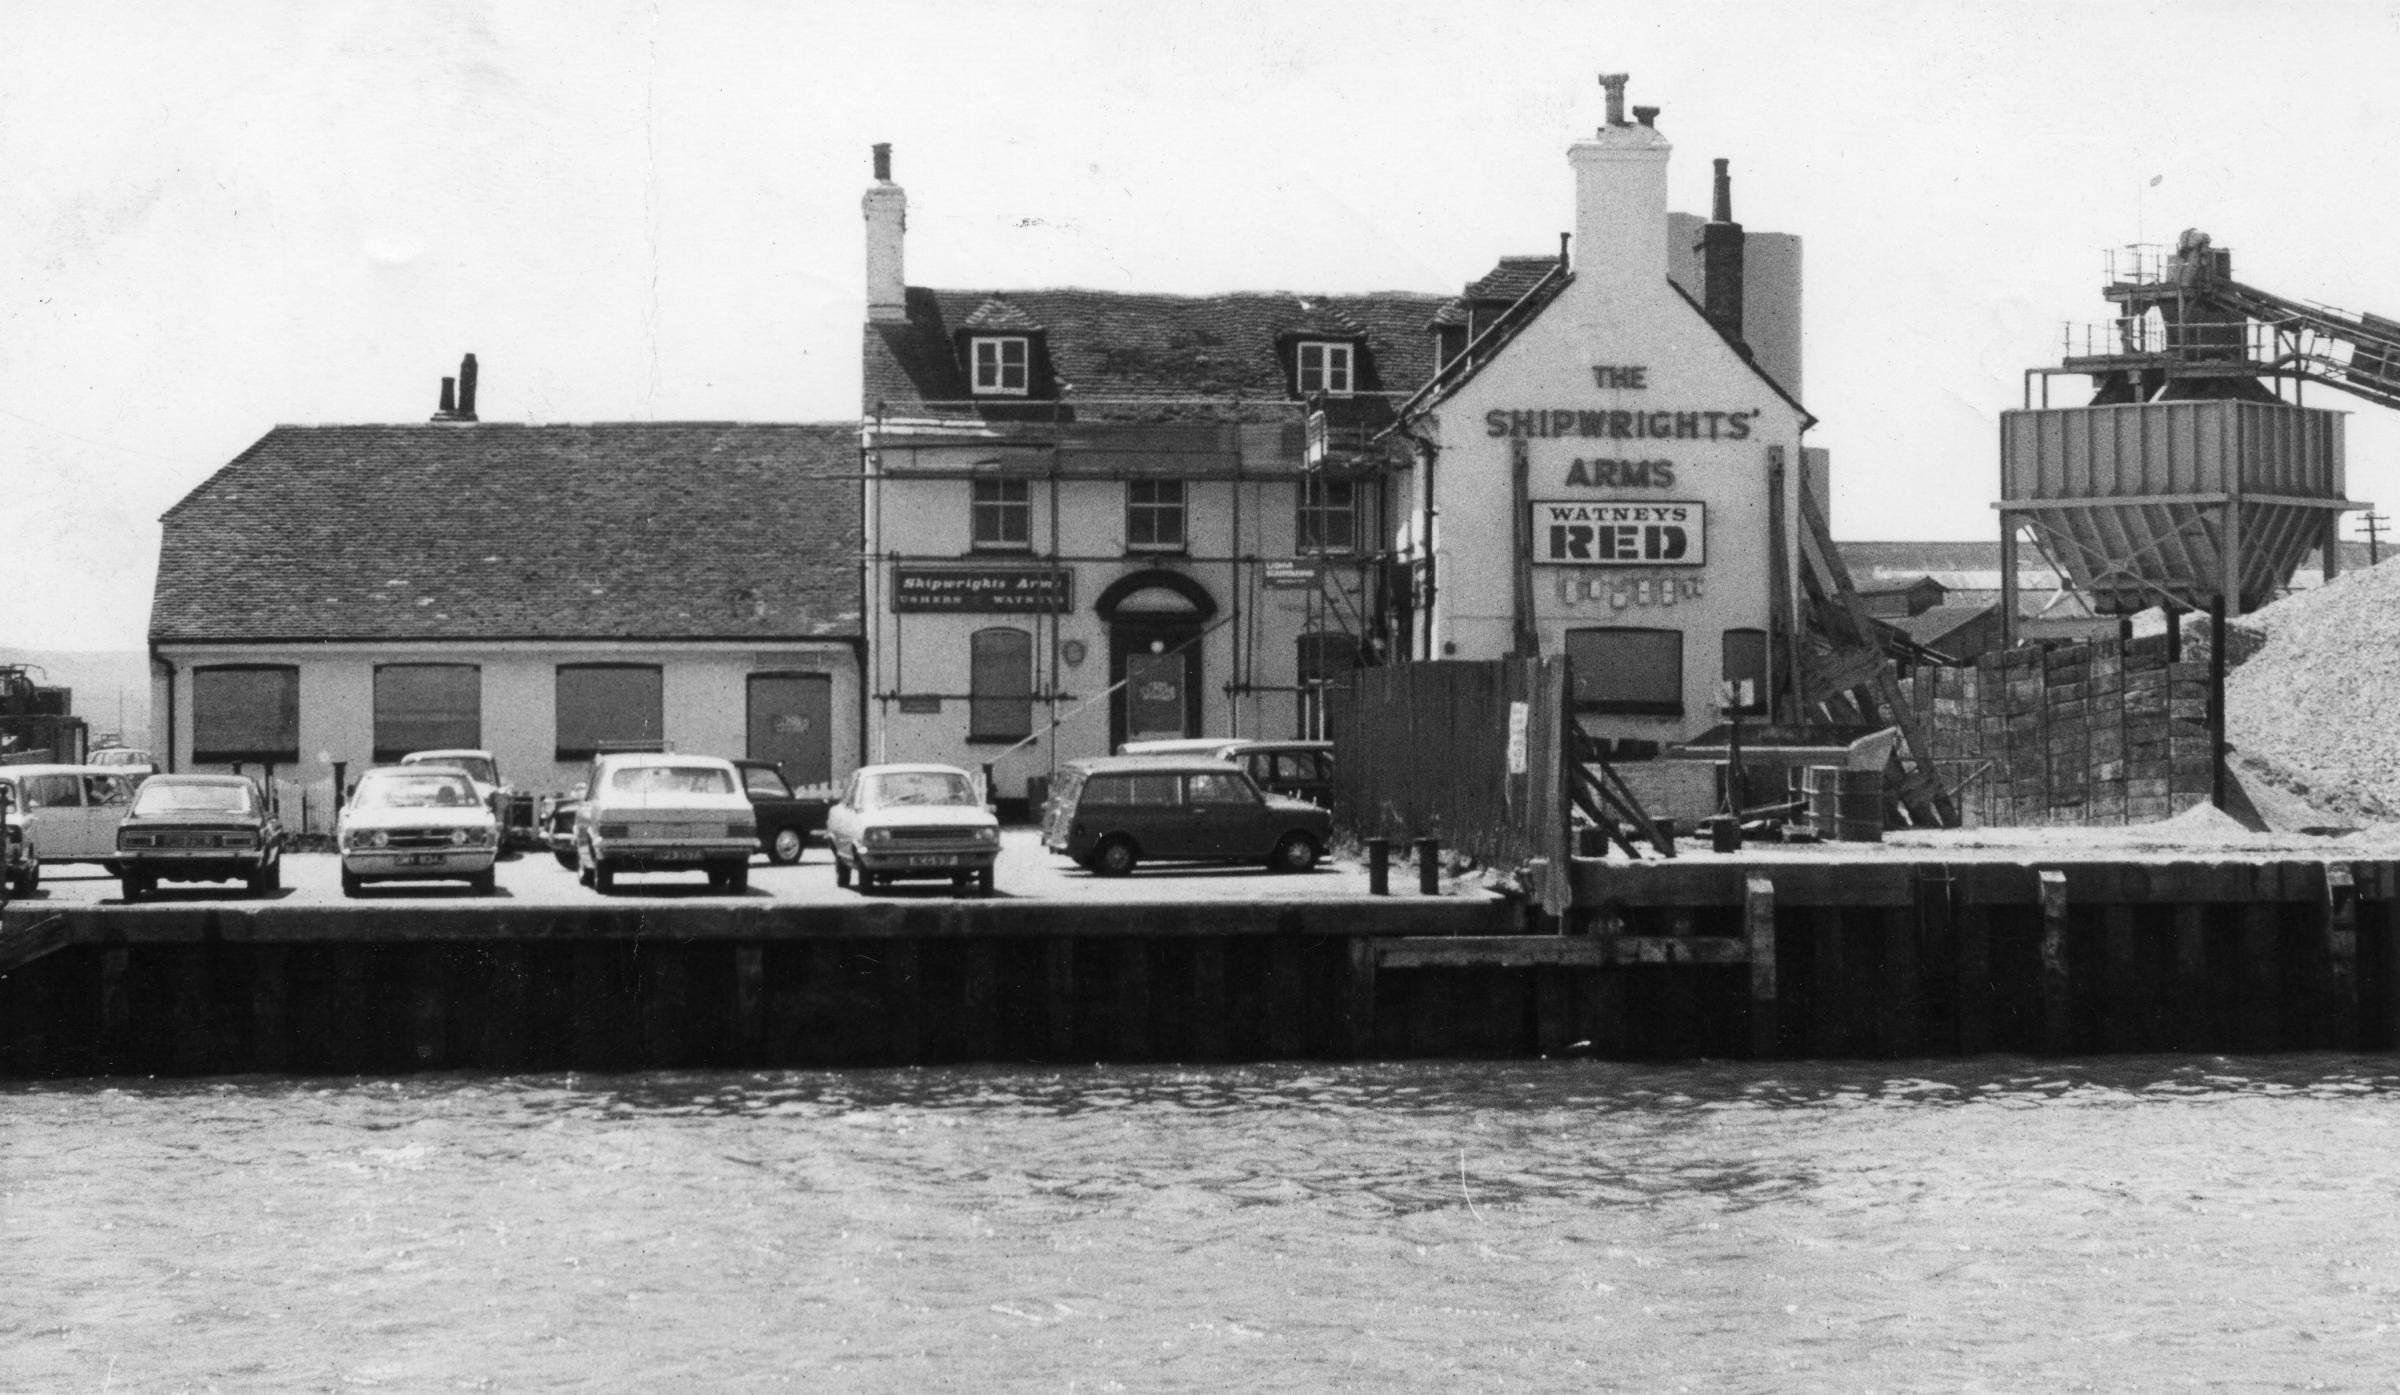 Shipwrights Arms, Poole Quay, 2nd June 1975